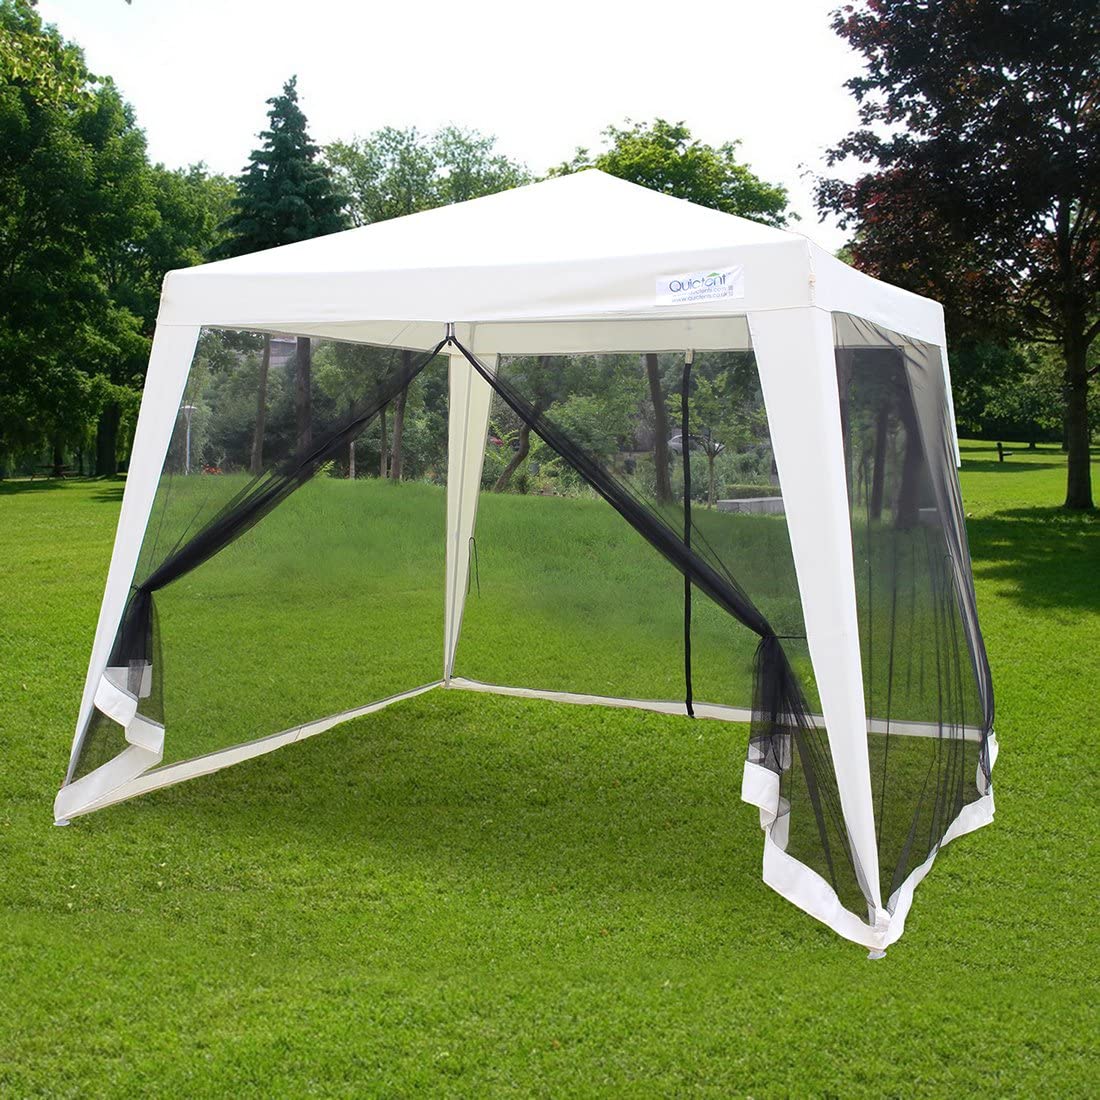 See from the right: Quitent 10' x 8' mesh netting party tent